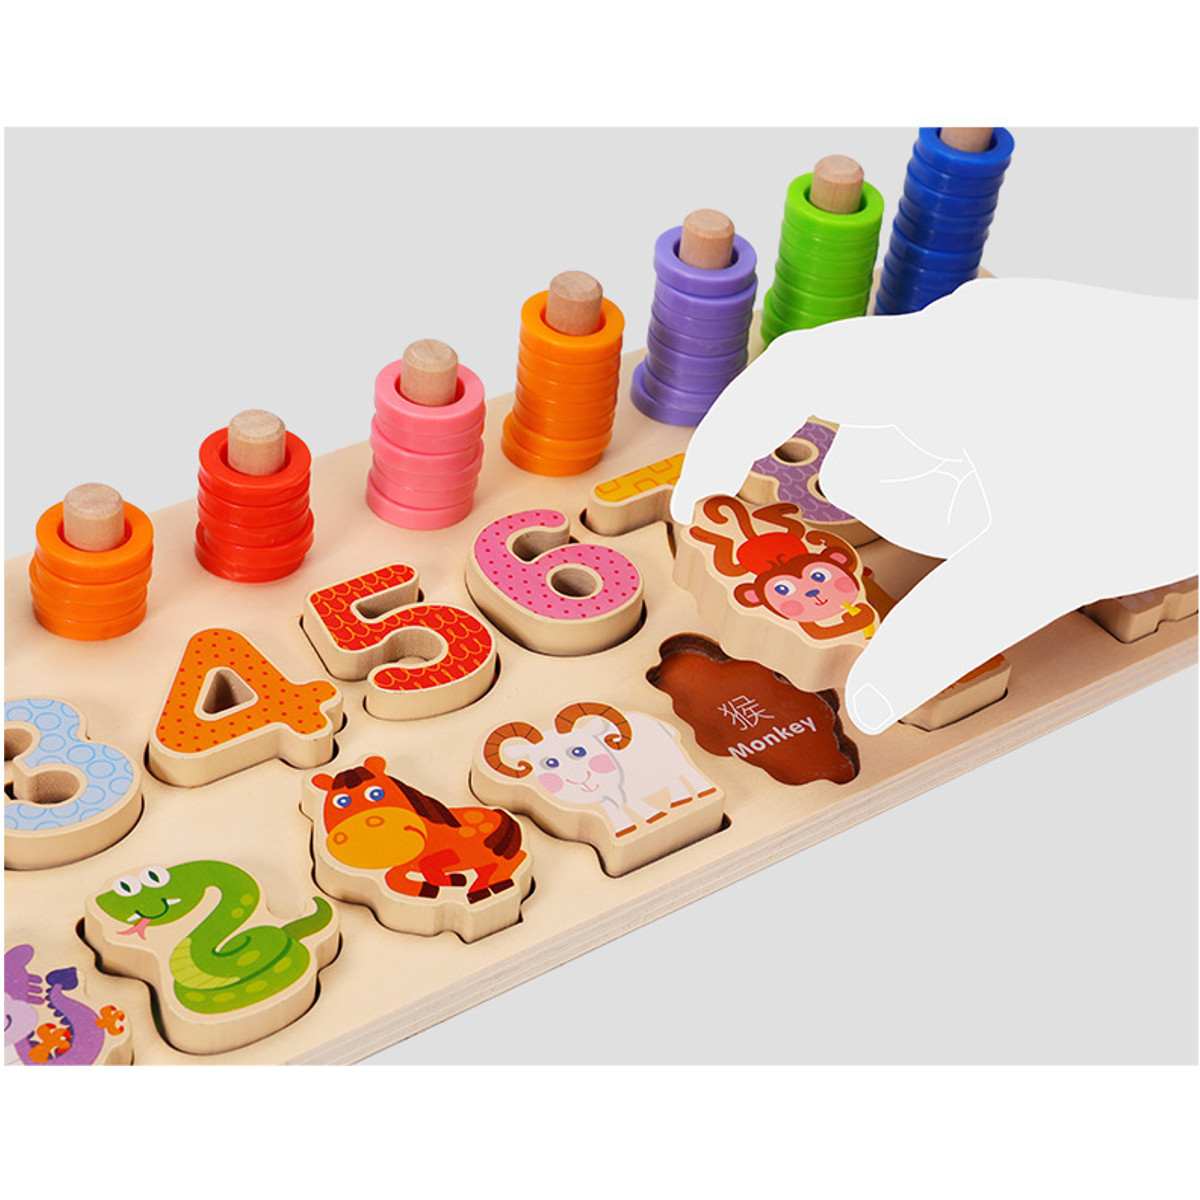 3-IN-1-Wooden-NumbersFruit-Jigsaw-Puzzle-Math-Learning-Educational-Set-Toys-1670888-9